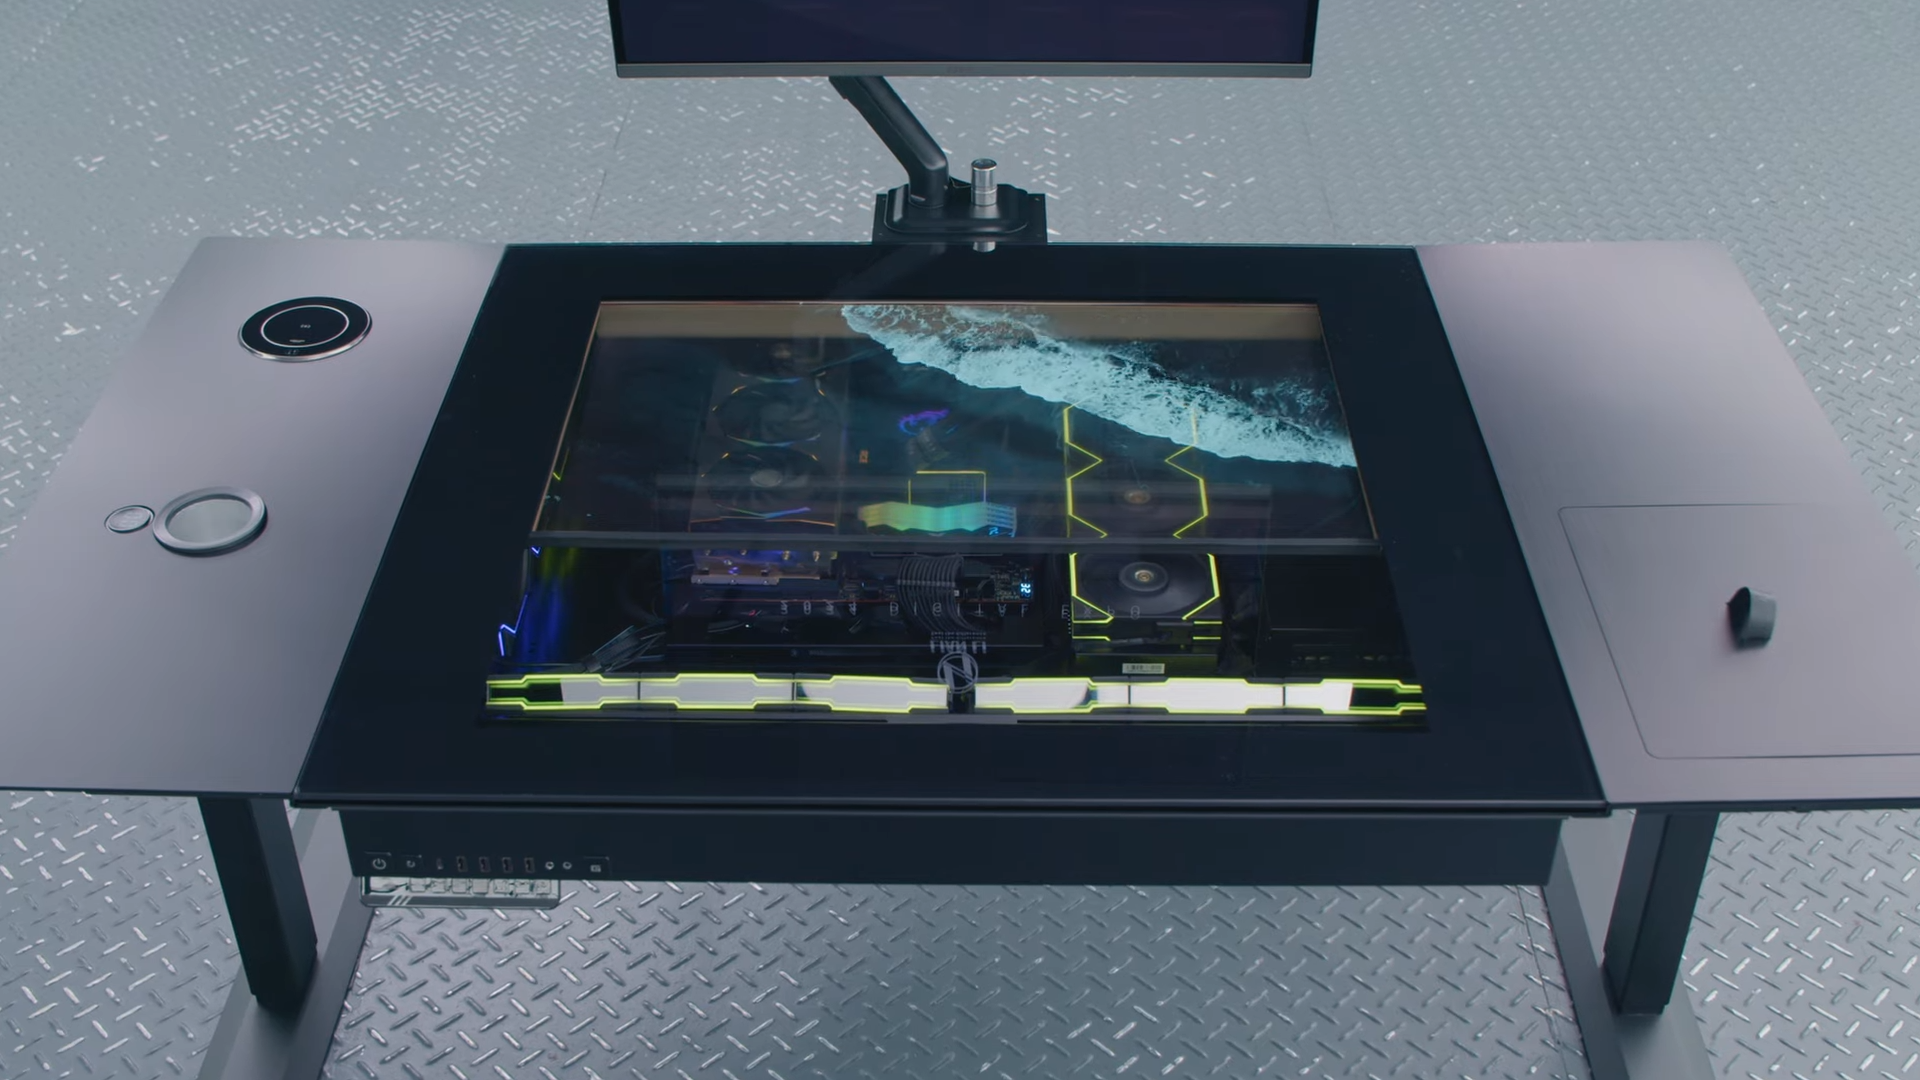 Lian Li has introduced the DK-07 - the original PC desk case with an integrated transparent OLED display